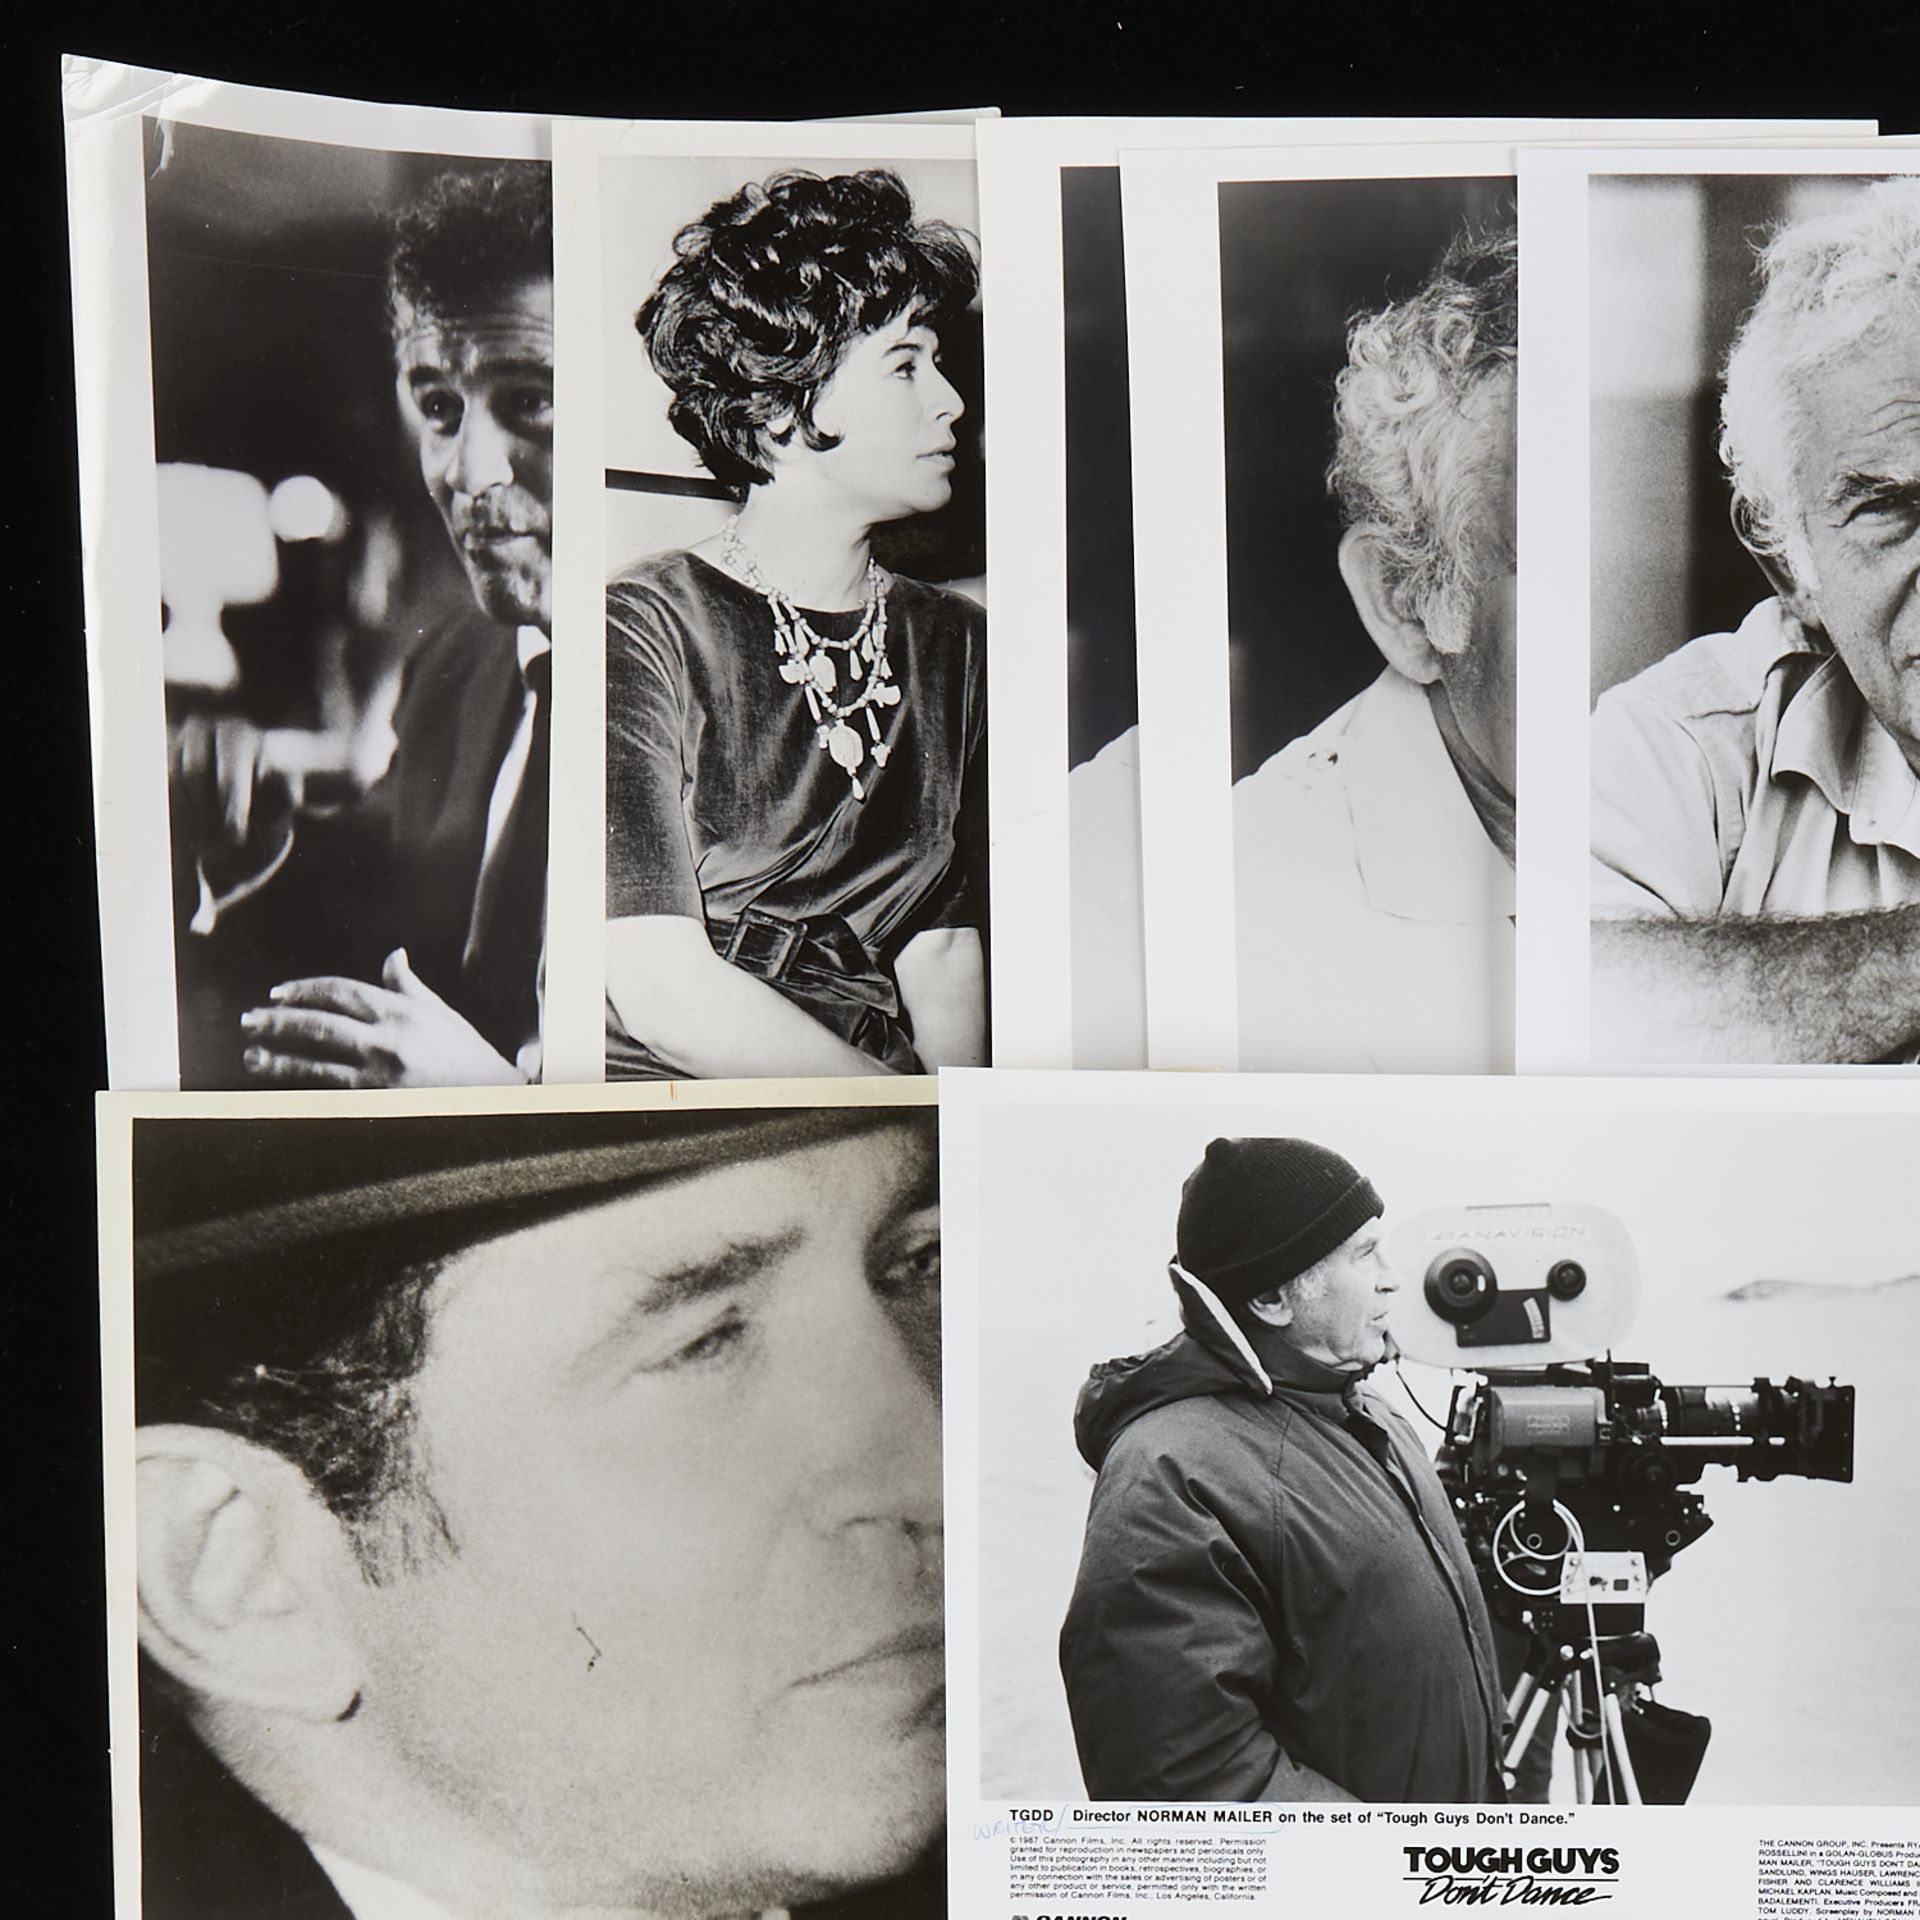 24 Norman Mailer Photos from Star Tribune Archives - Image 5 of 10